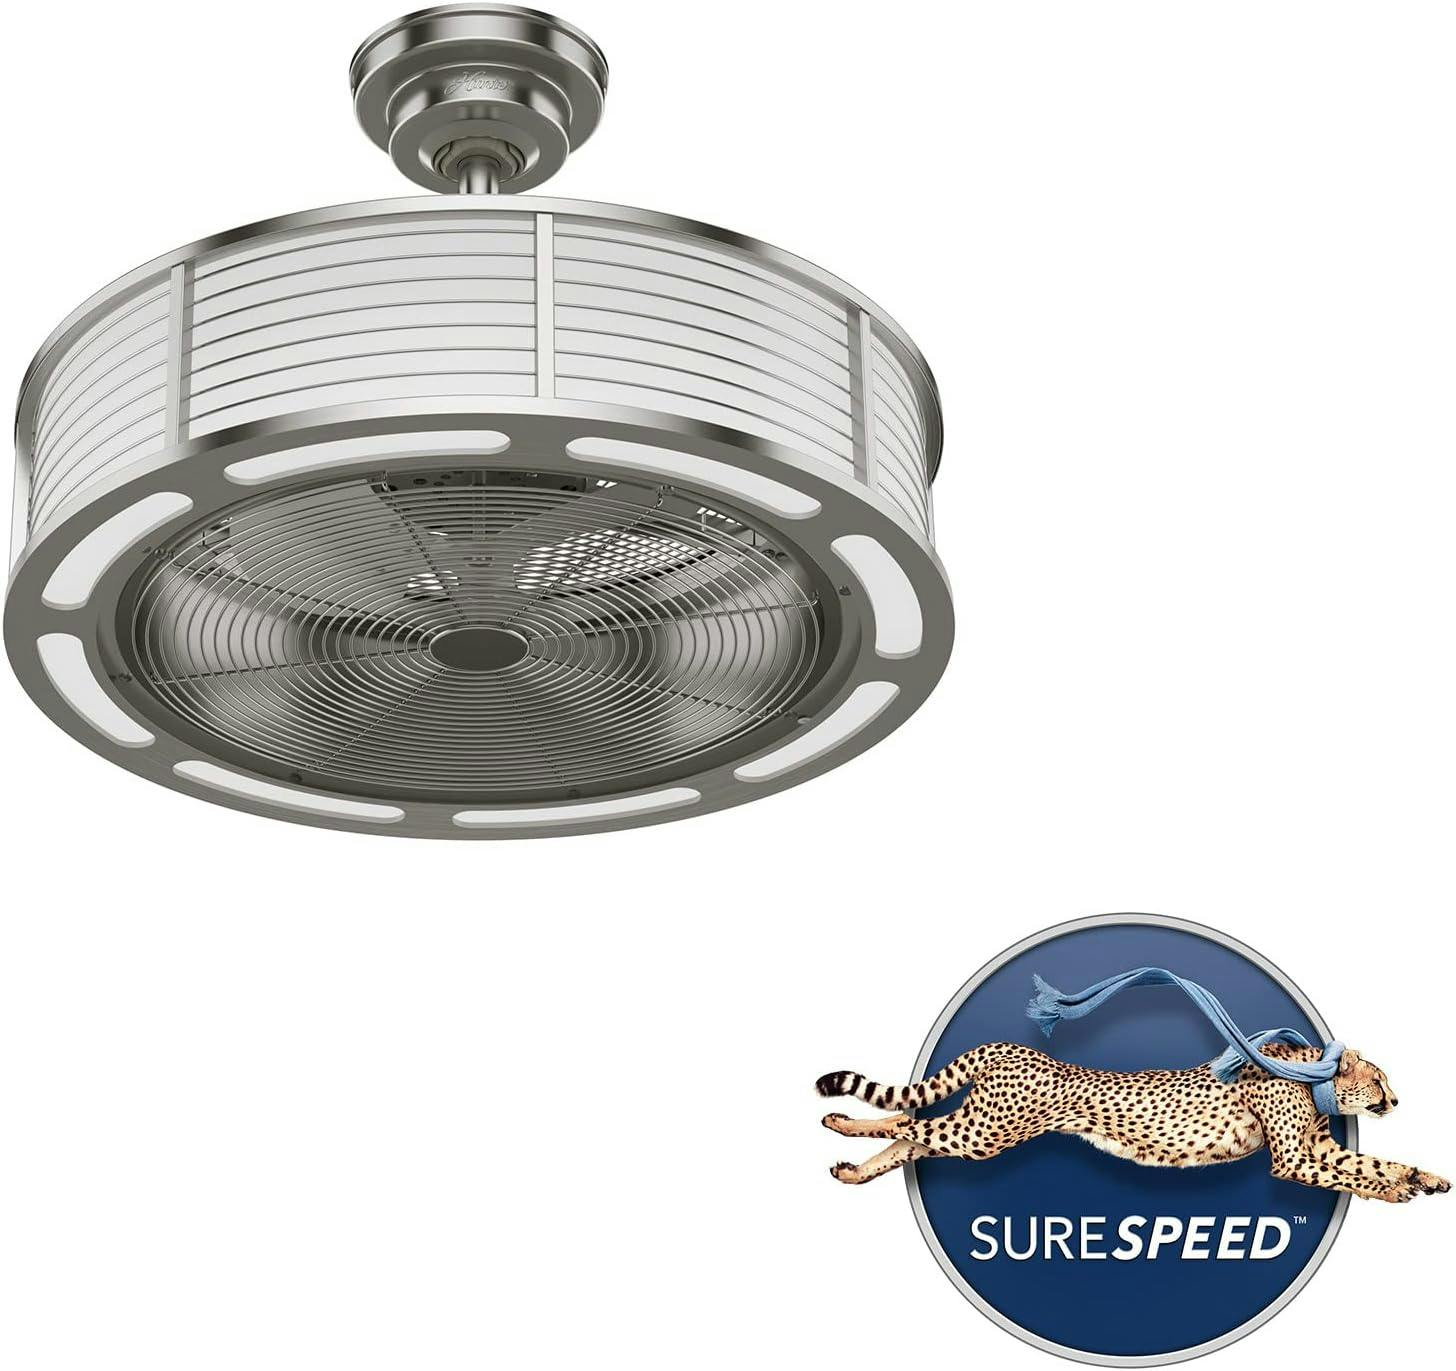 Tunley 22" Brushed Nickel LED Ceiling Fan with Wall Control